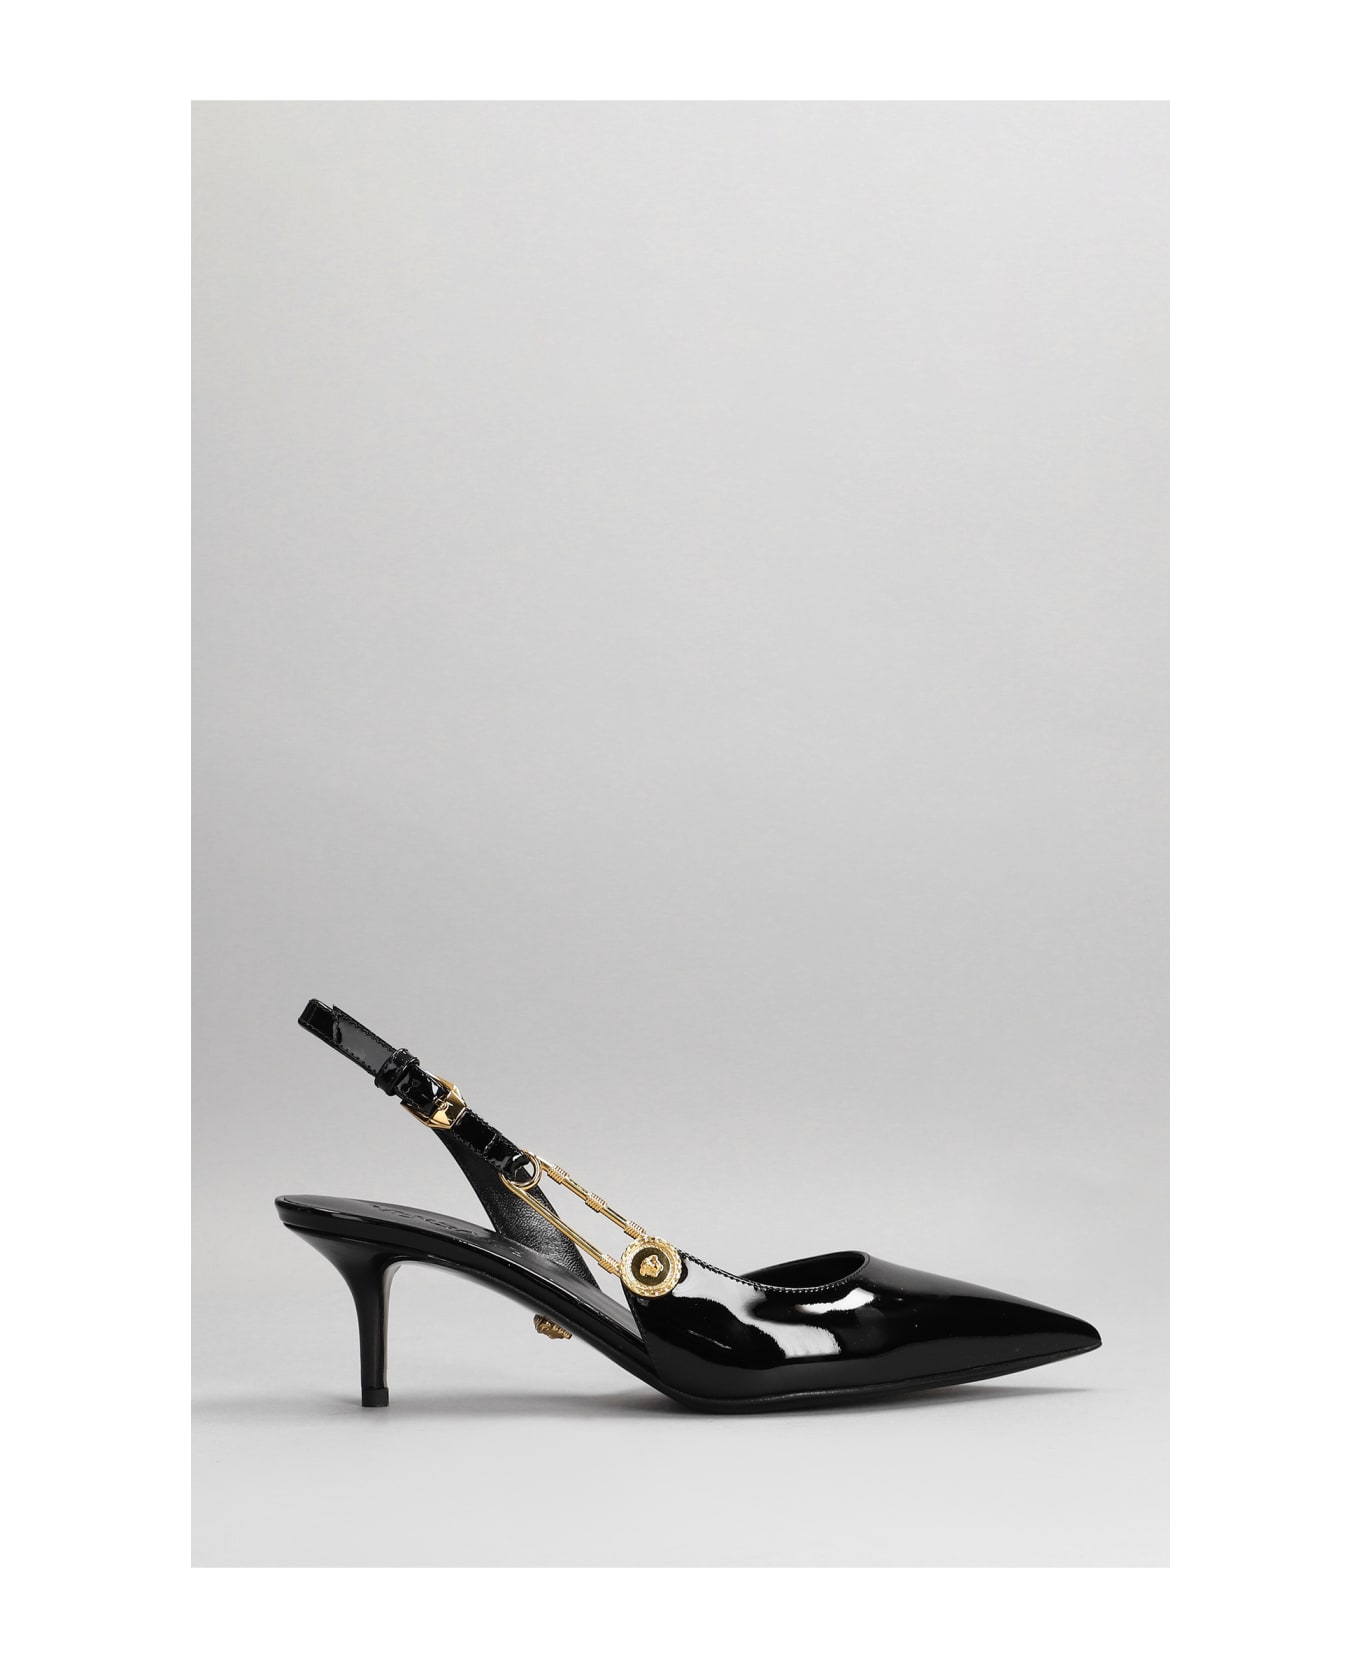 Versace Pumps In Black Patent Leather - black